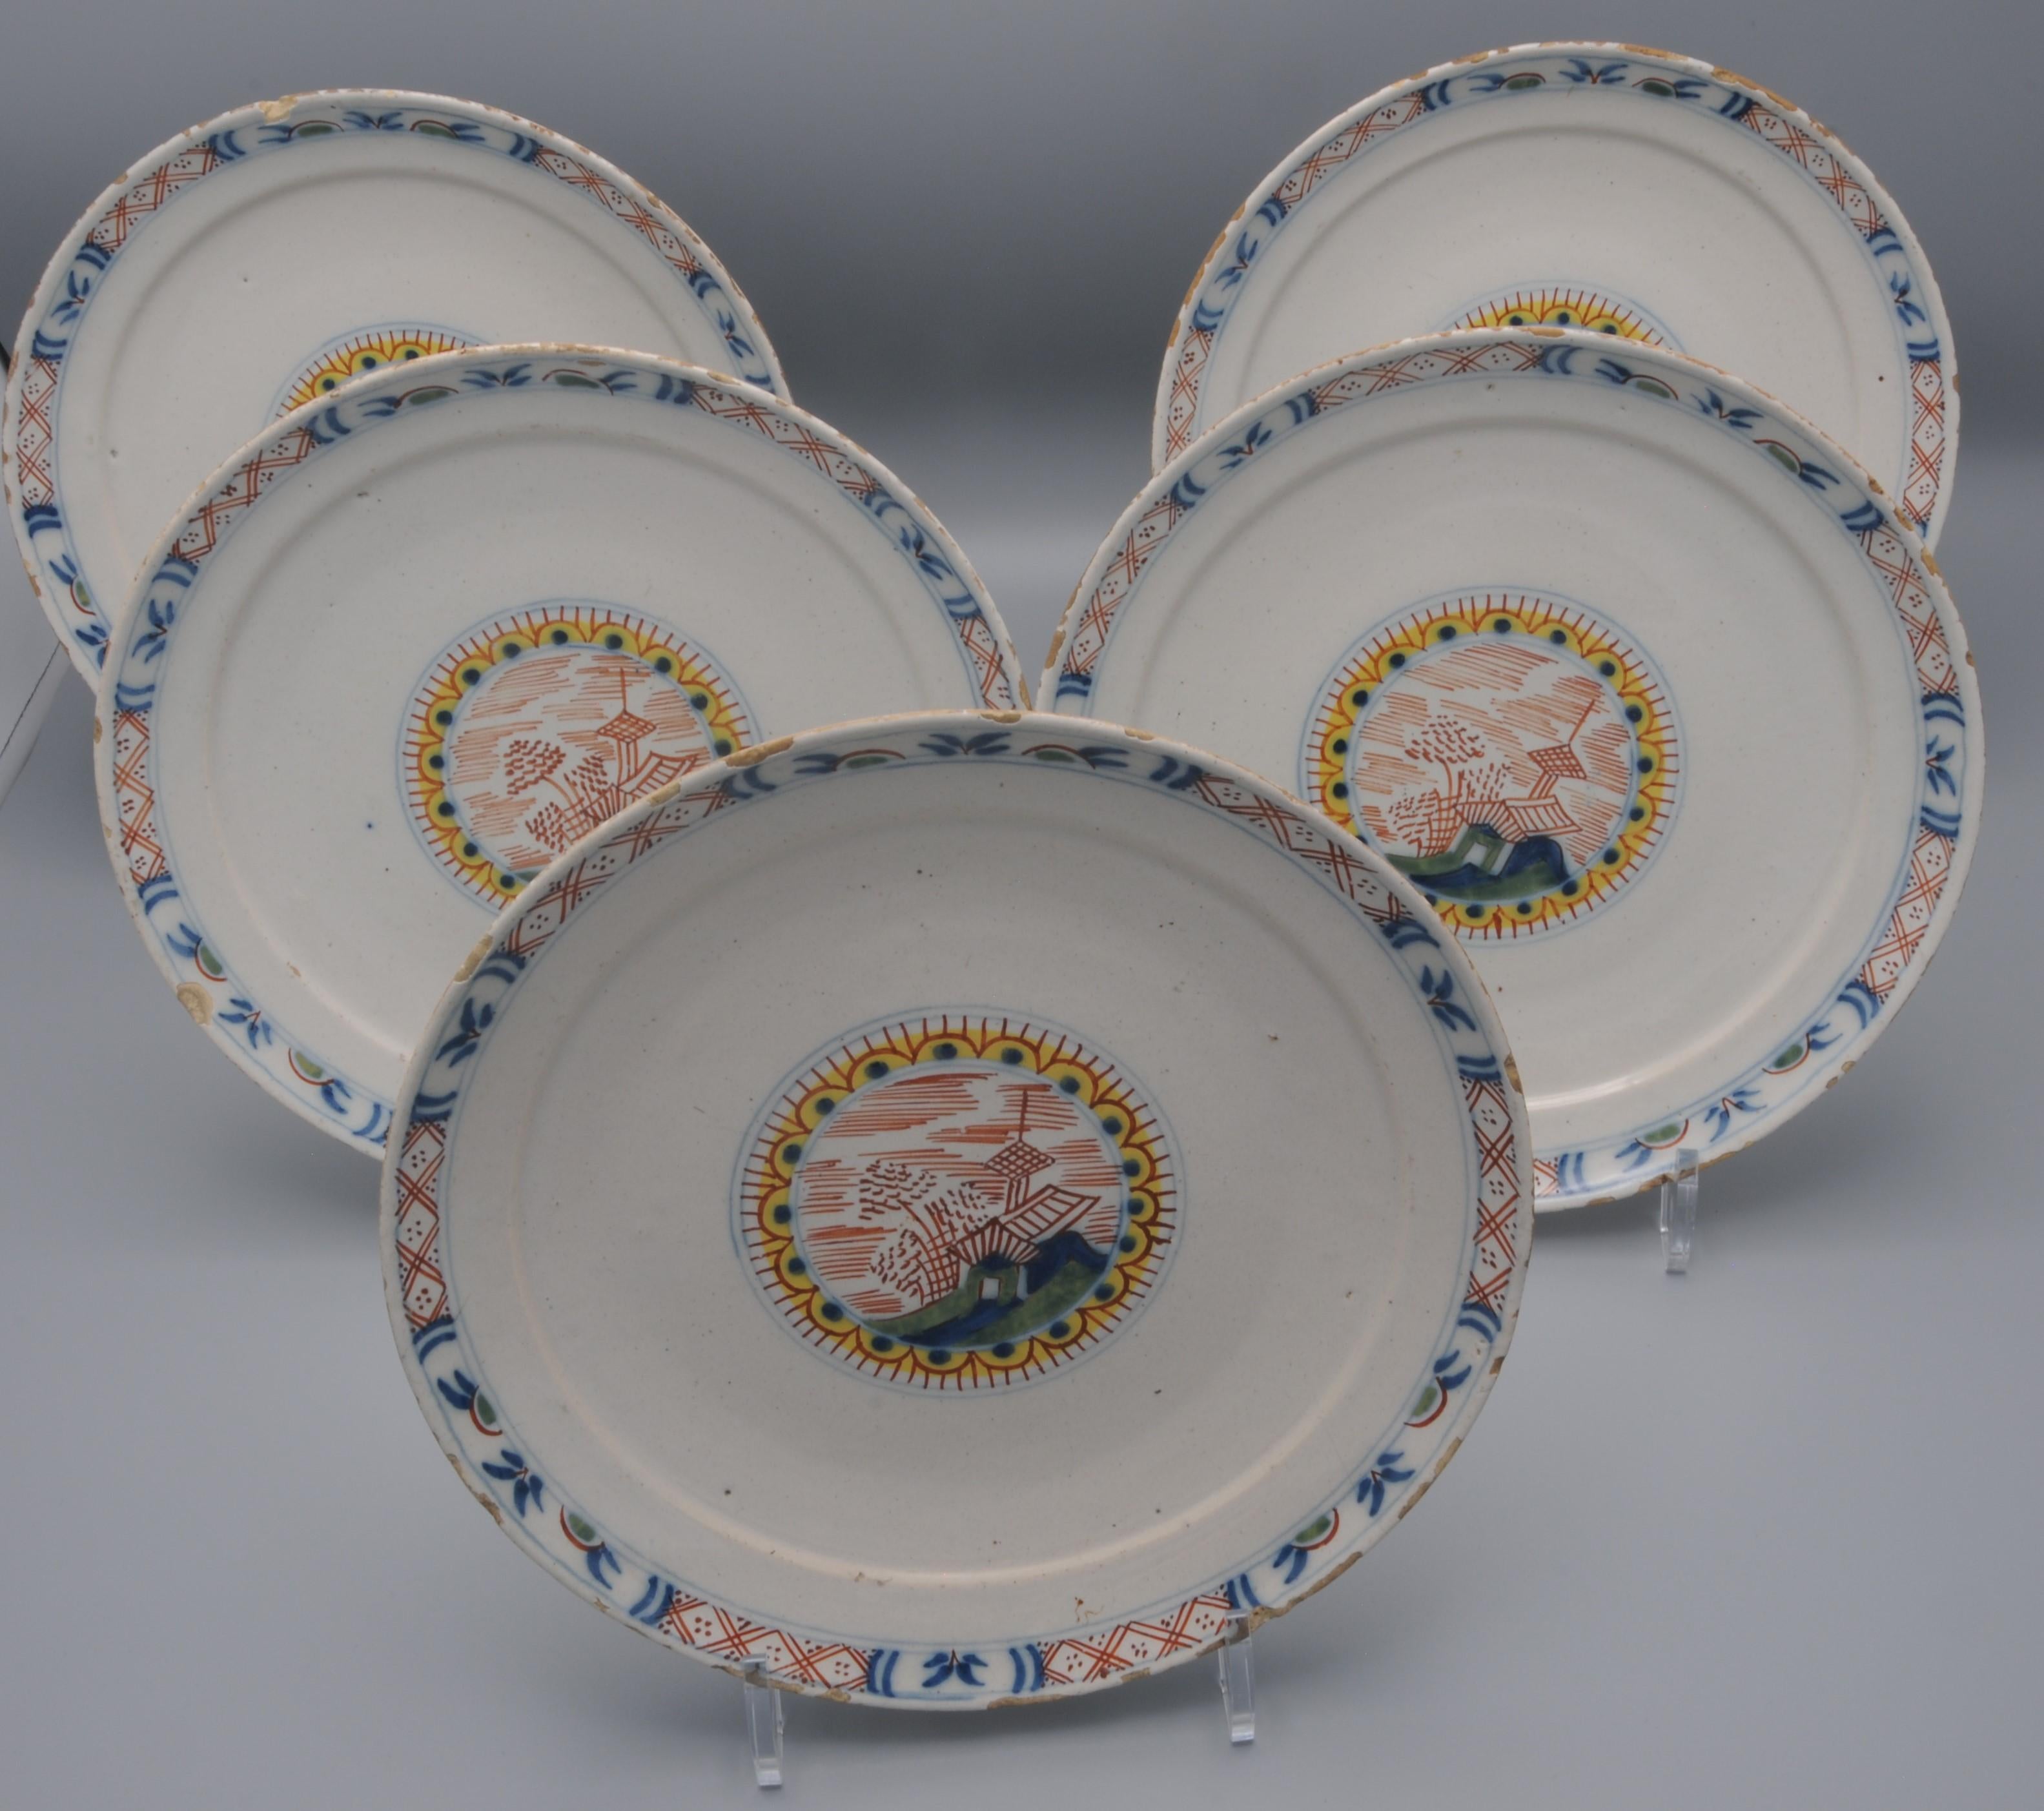 Set of five mid 18th century Delftware plates with chinoiserie decoration of a pagode.
Unmarked.

Condition: some chipping and wear to the rim